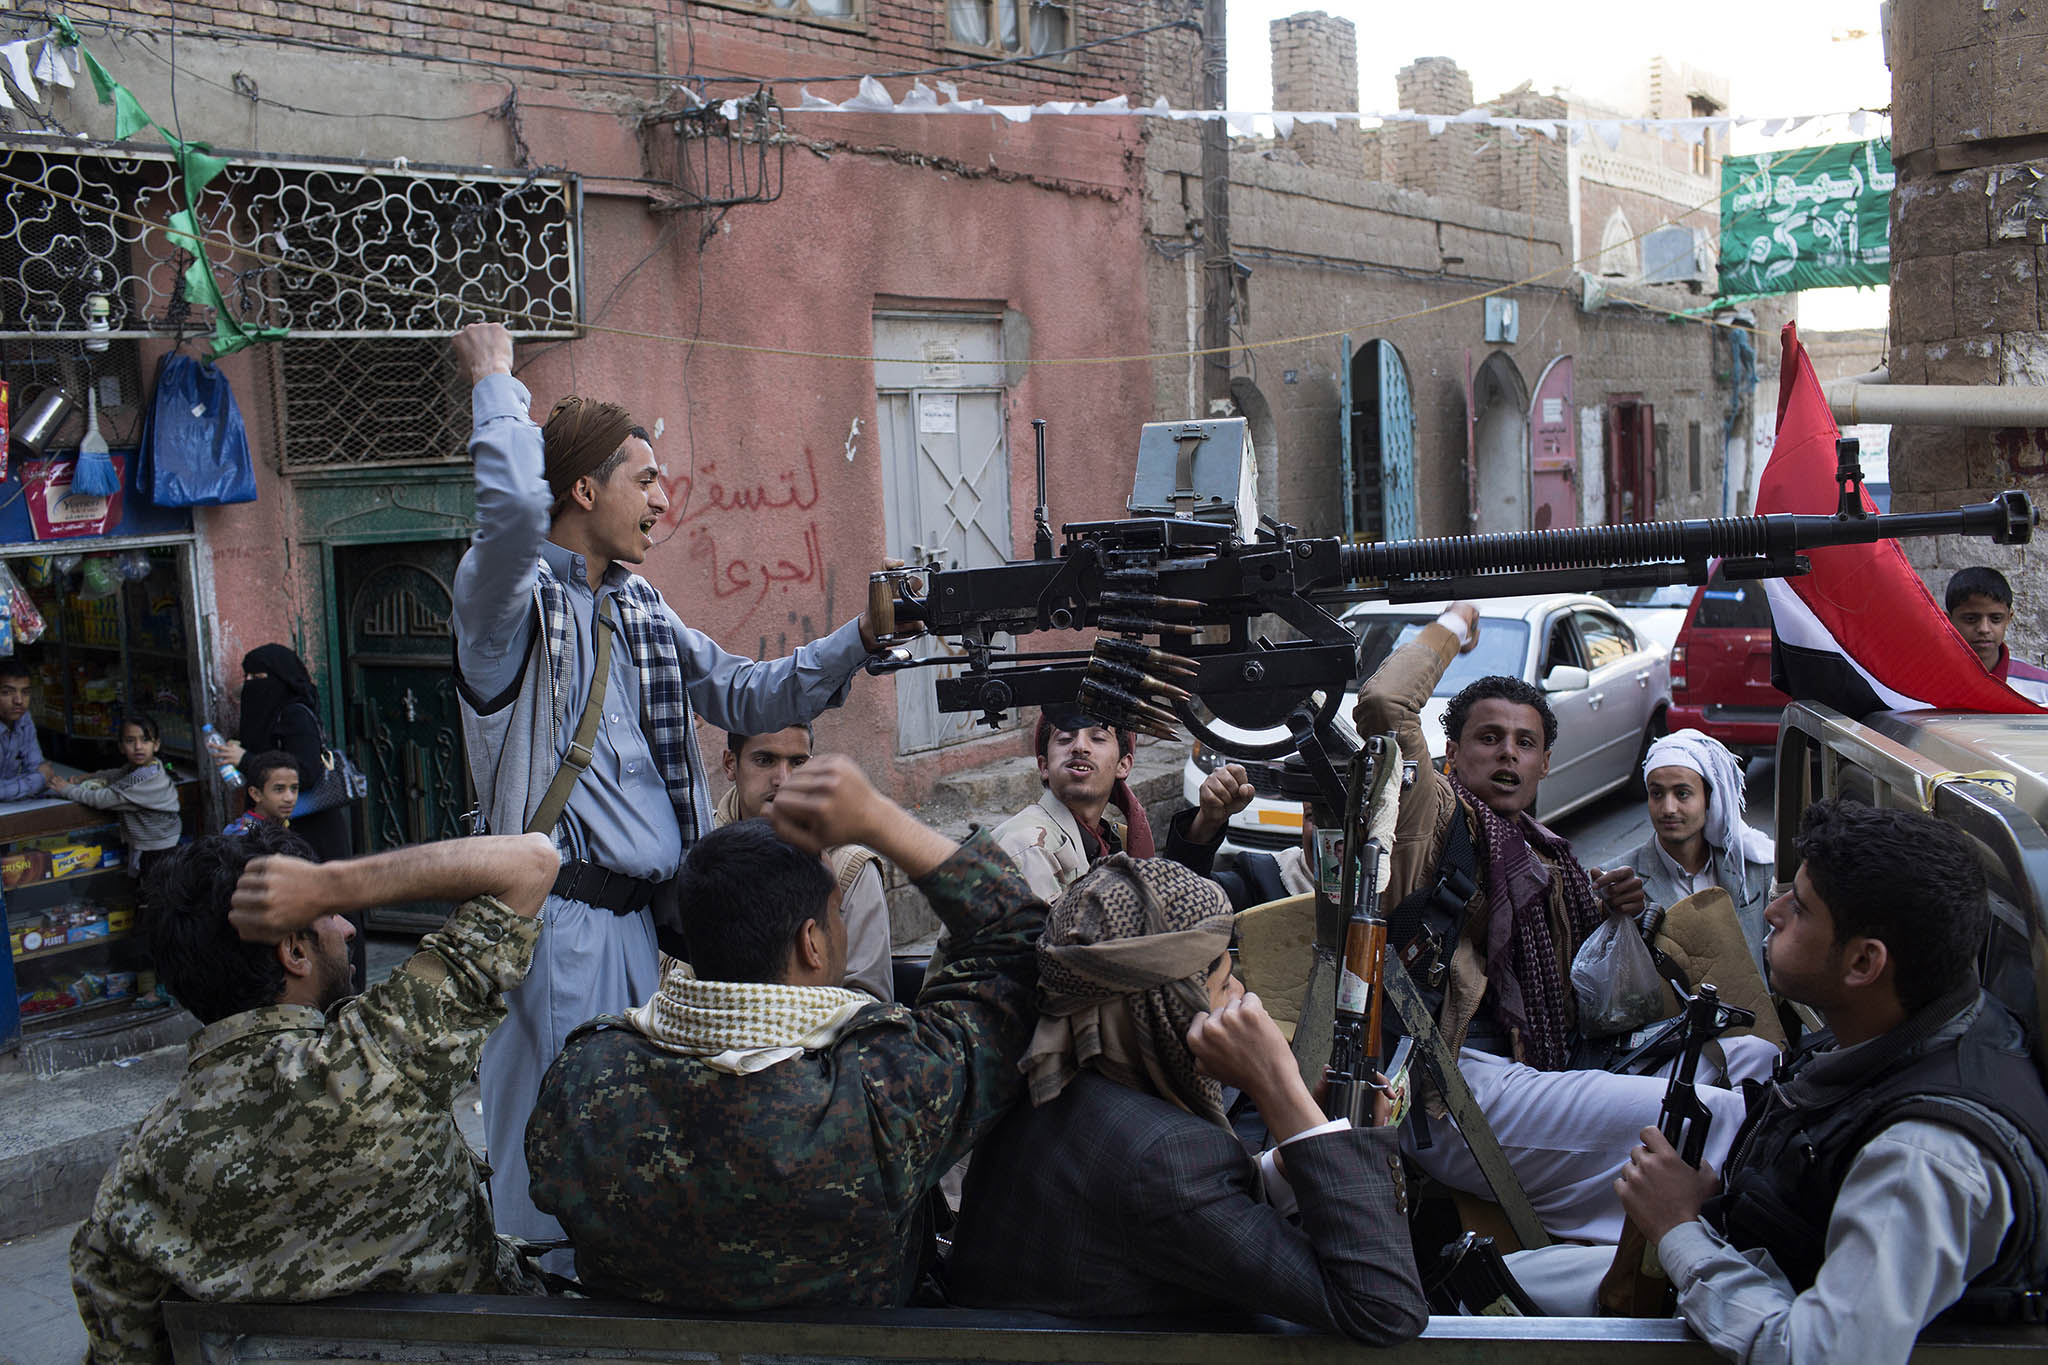 Houthi rebel forces in Sana’a, the capital of Yemen, on Feb. 6, 2015. Iran has armed the rebels with missiles and drones, endangering Washington’s partners and Tehran’s rivals, Saudi Arabia and the United Arab Emirates. (Tyler Hicks/The New York Times)